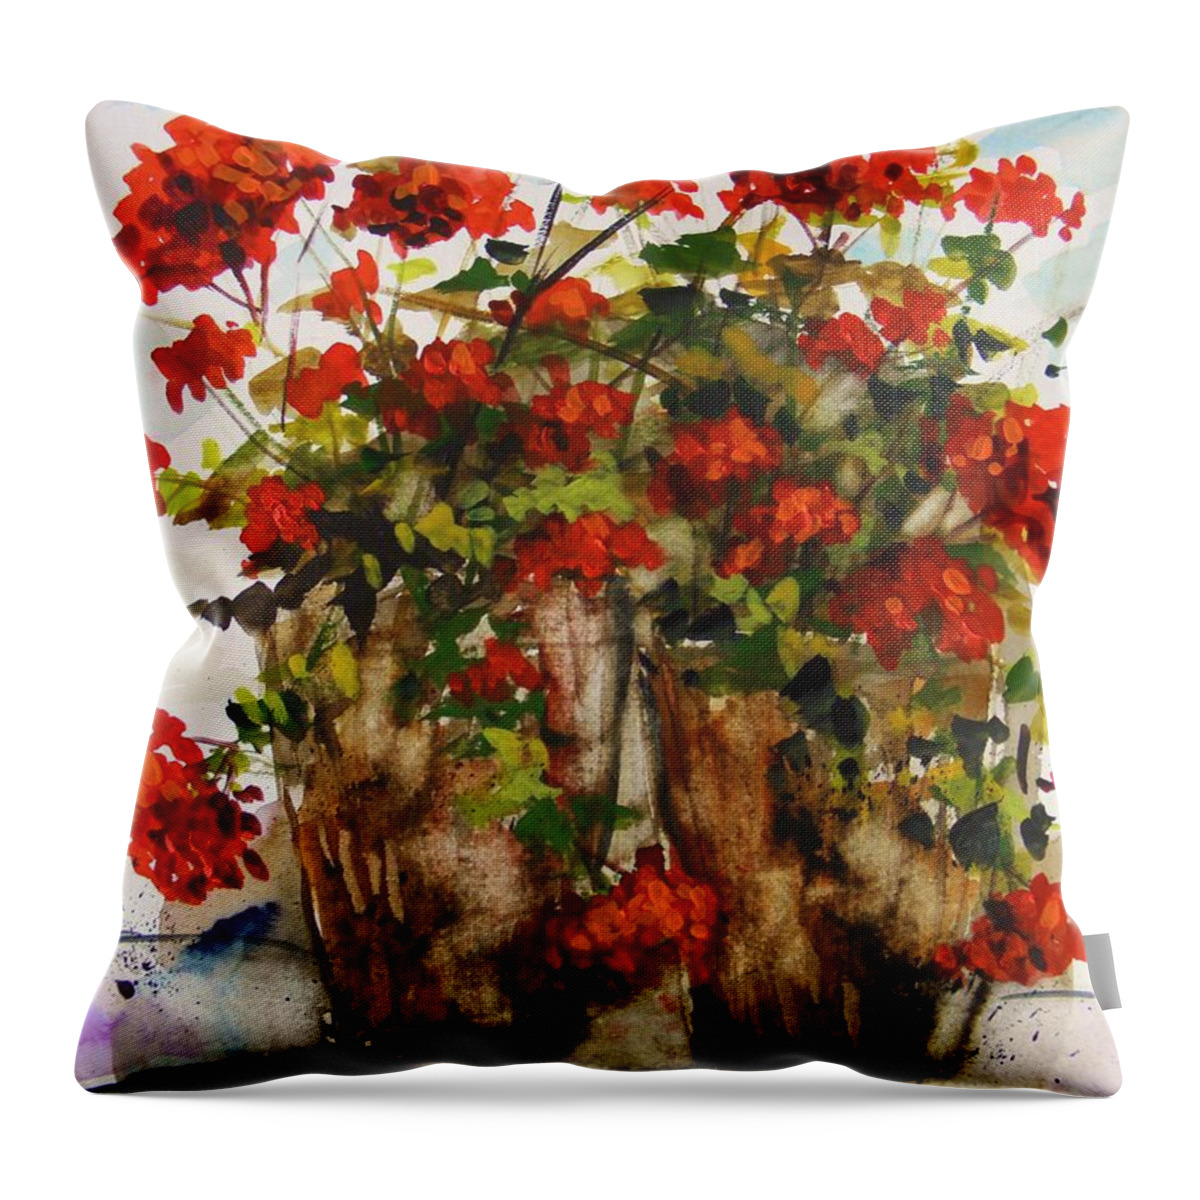 Porch Geraniums Throw Pillow featuring the painting Porch Geraniums by John Williams